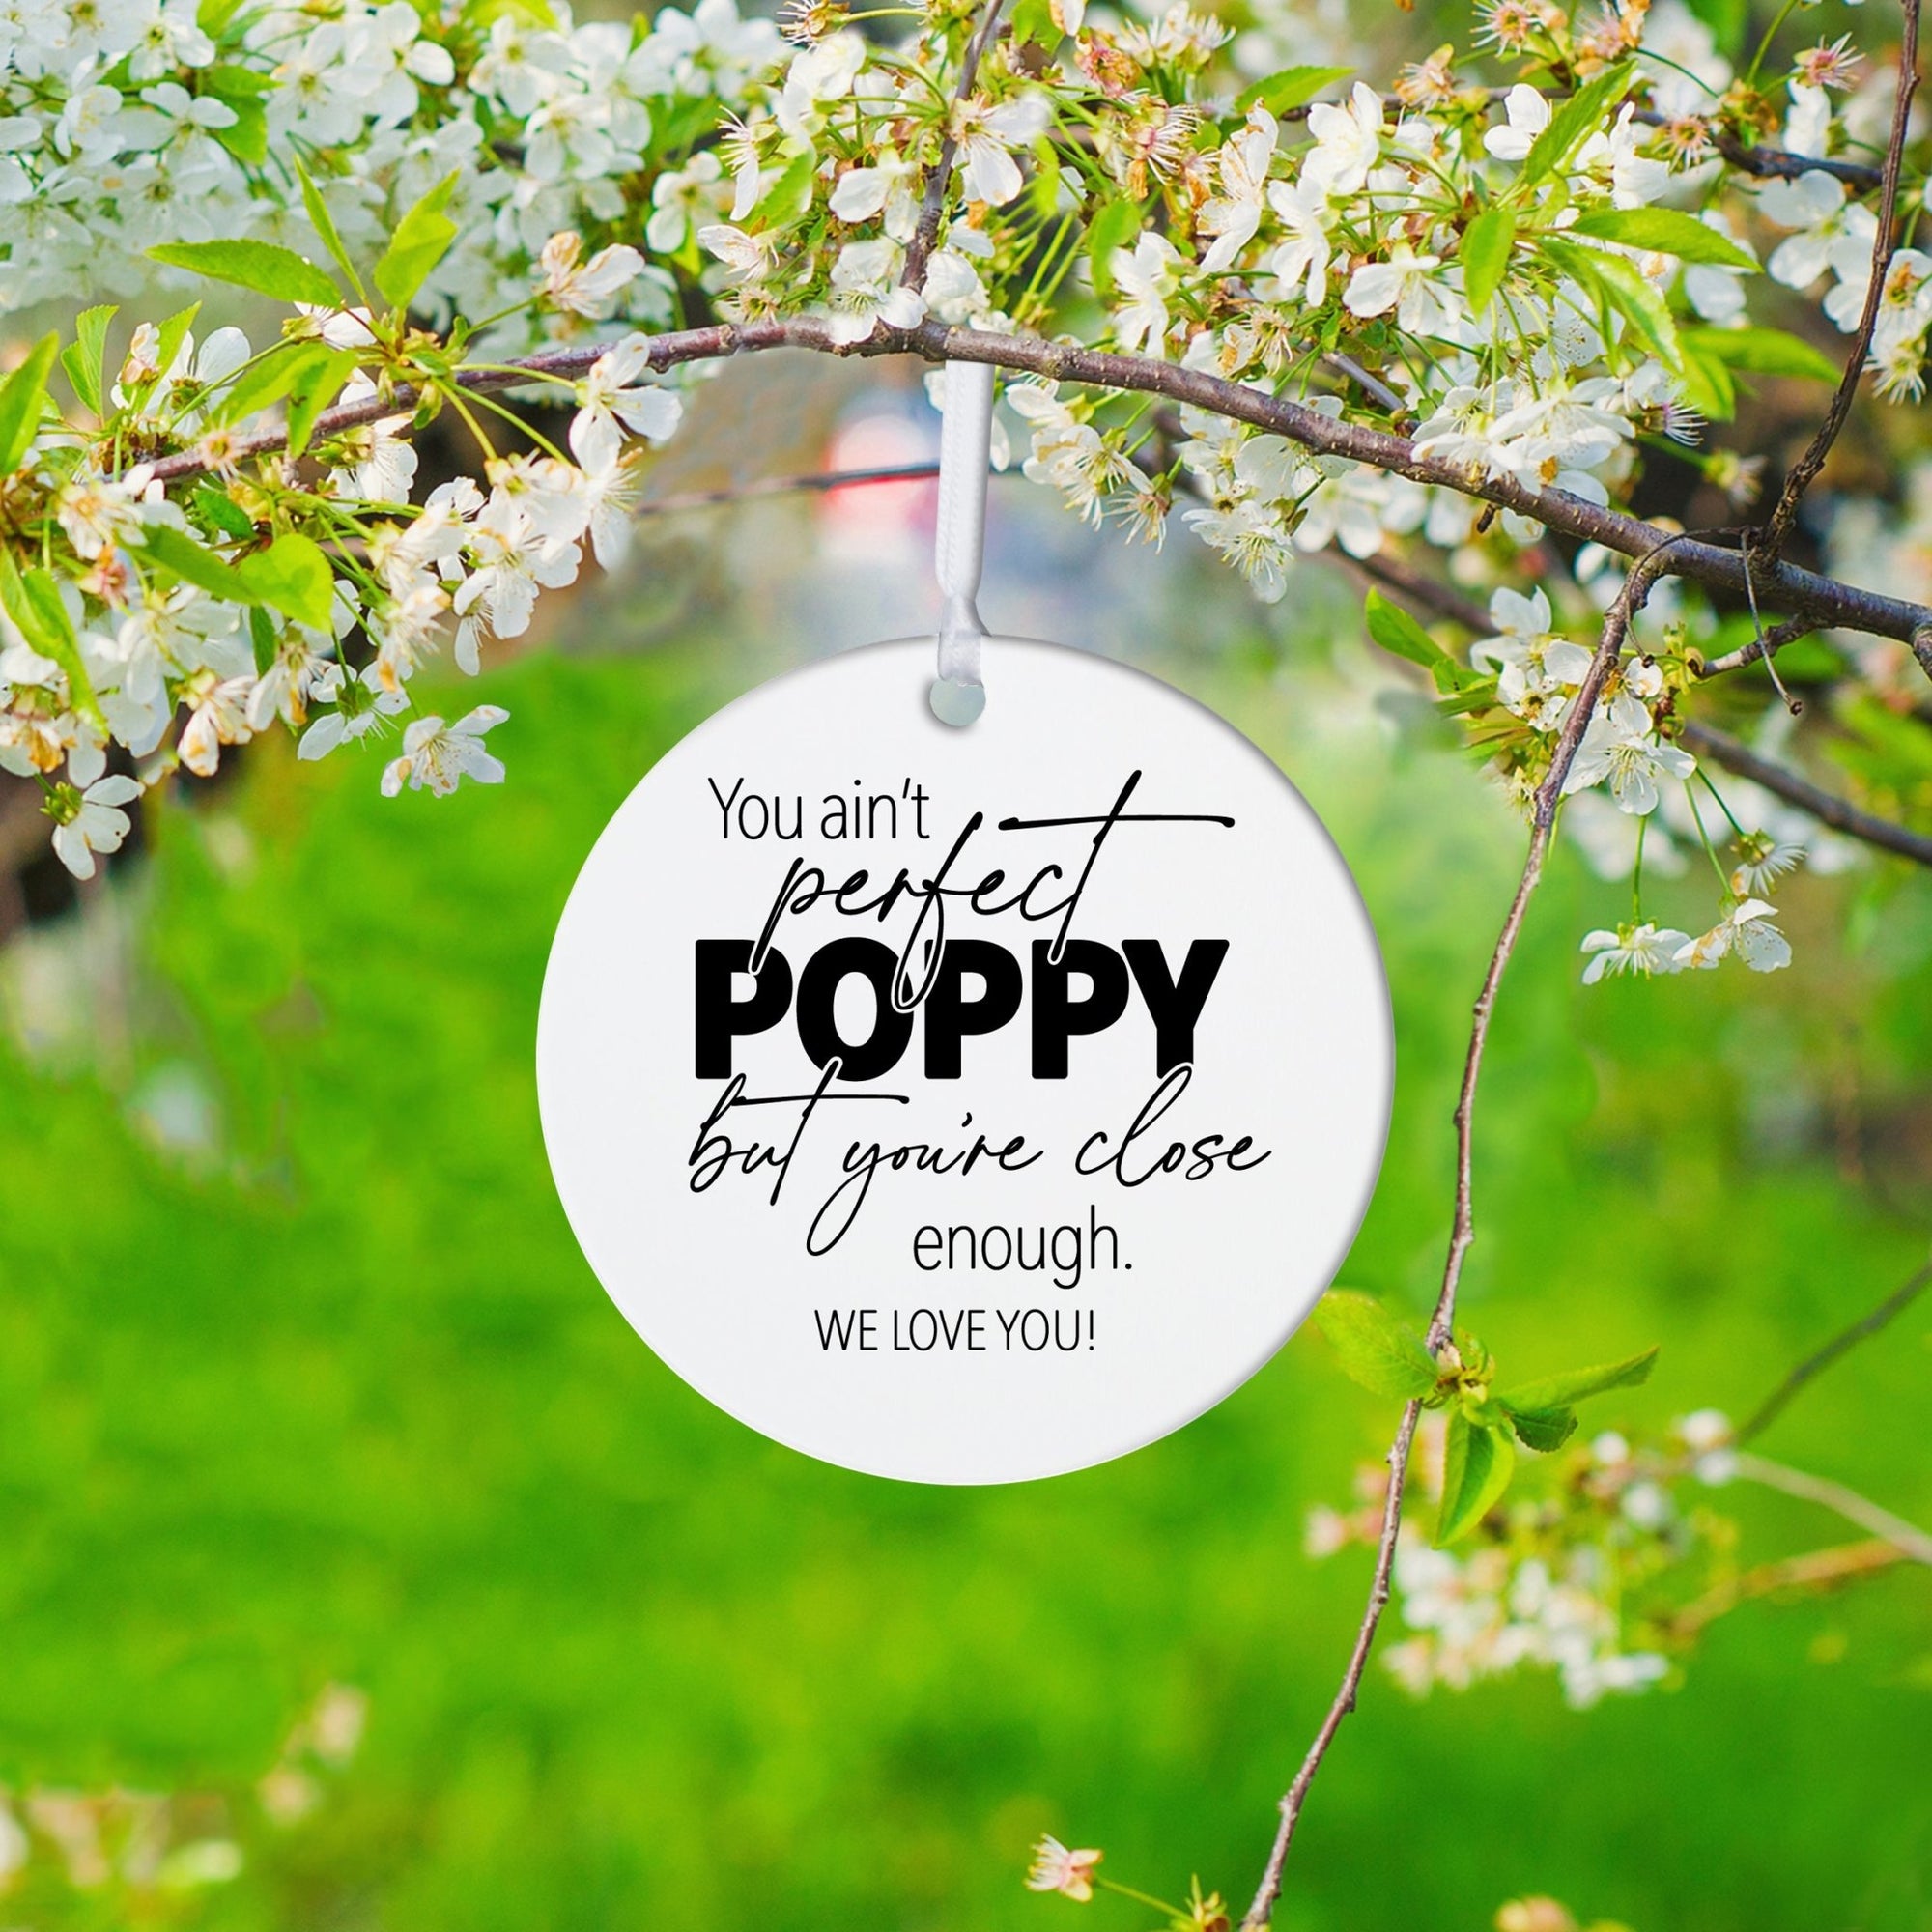 Grandparents White Ornament With Inspirational Message Gift Ideas - You Ain't Perfect Poppy - LifeSong Milestones